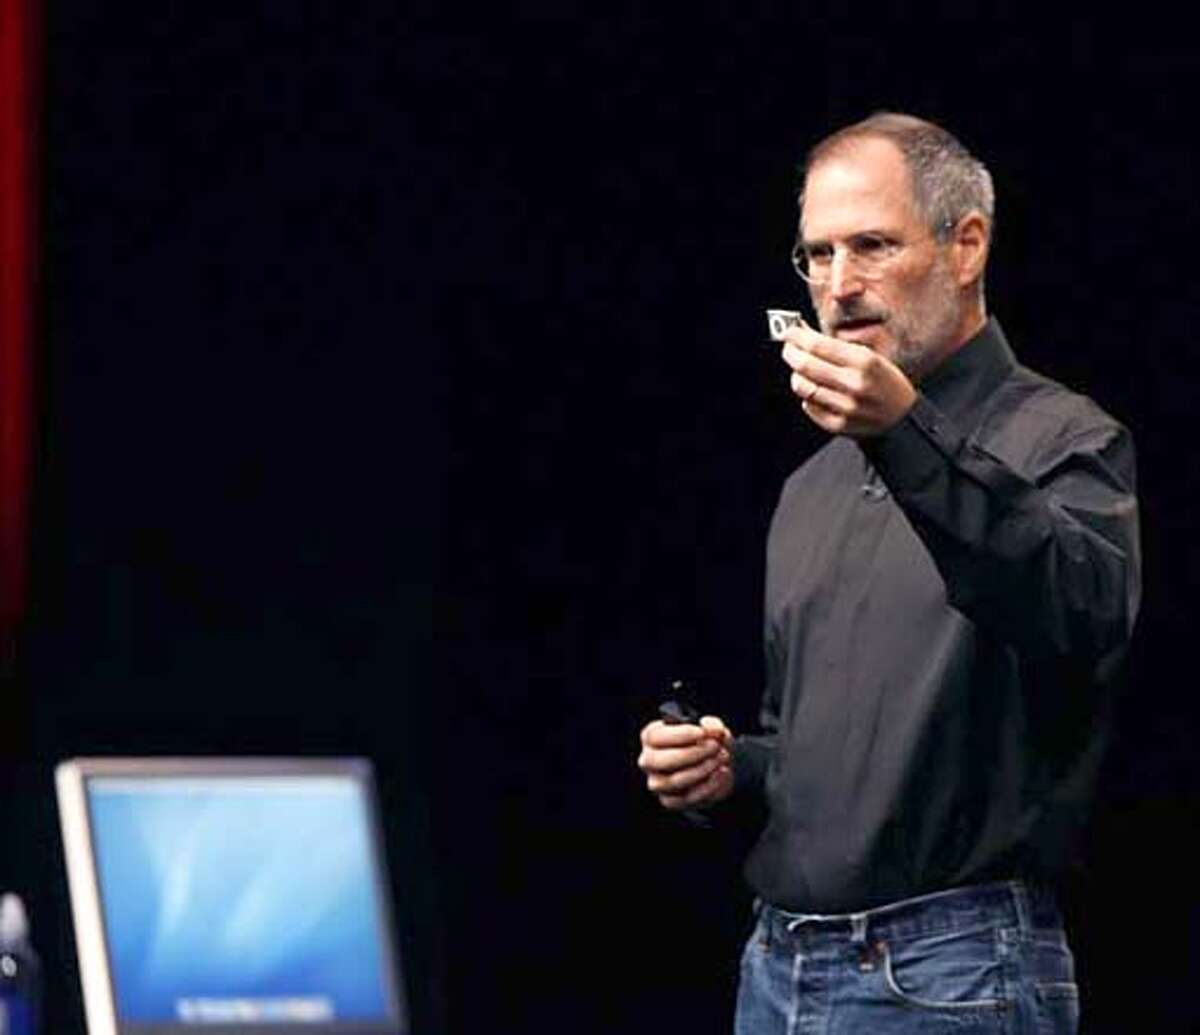 APPLE13_004_CAG.JPG Steve Jobs holds the new iPod Shuffle. Apple unveils its latest iPod and iTunes upgrades and devices at a special event Tuesday, September 12, 2006, in San Francisco, Ca. Photo by Carlos Avila Gonzalez/The San Francisco Chronicle Photo taken on 9/12/06, in San Francisco, CA, USA **All names cq (source) MANDATORY CREDIT FOR PHOTOG AND SAN FRANCISCO CHRONICLE/NO SALES-MAGS OUT